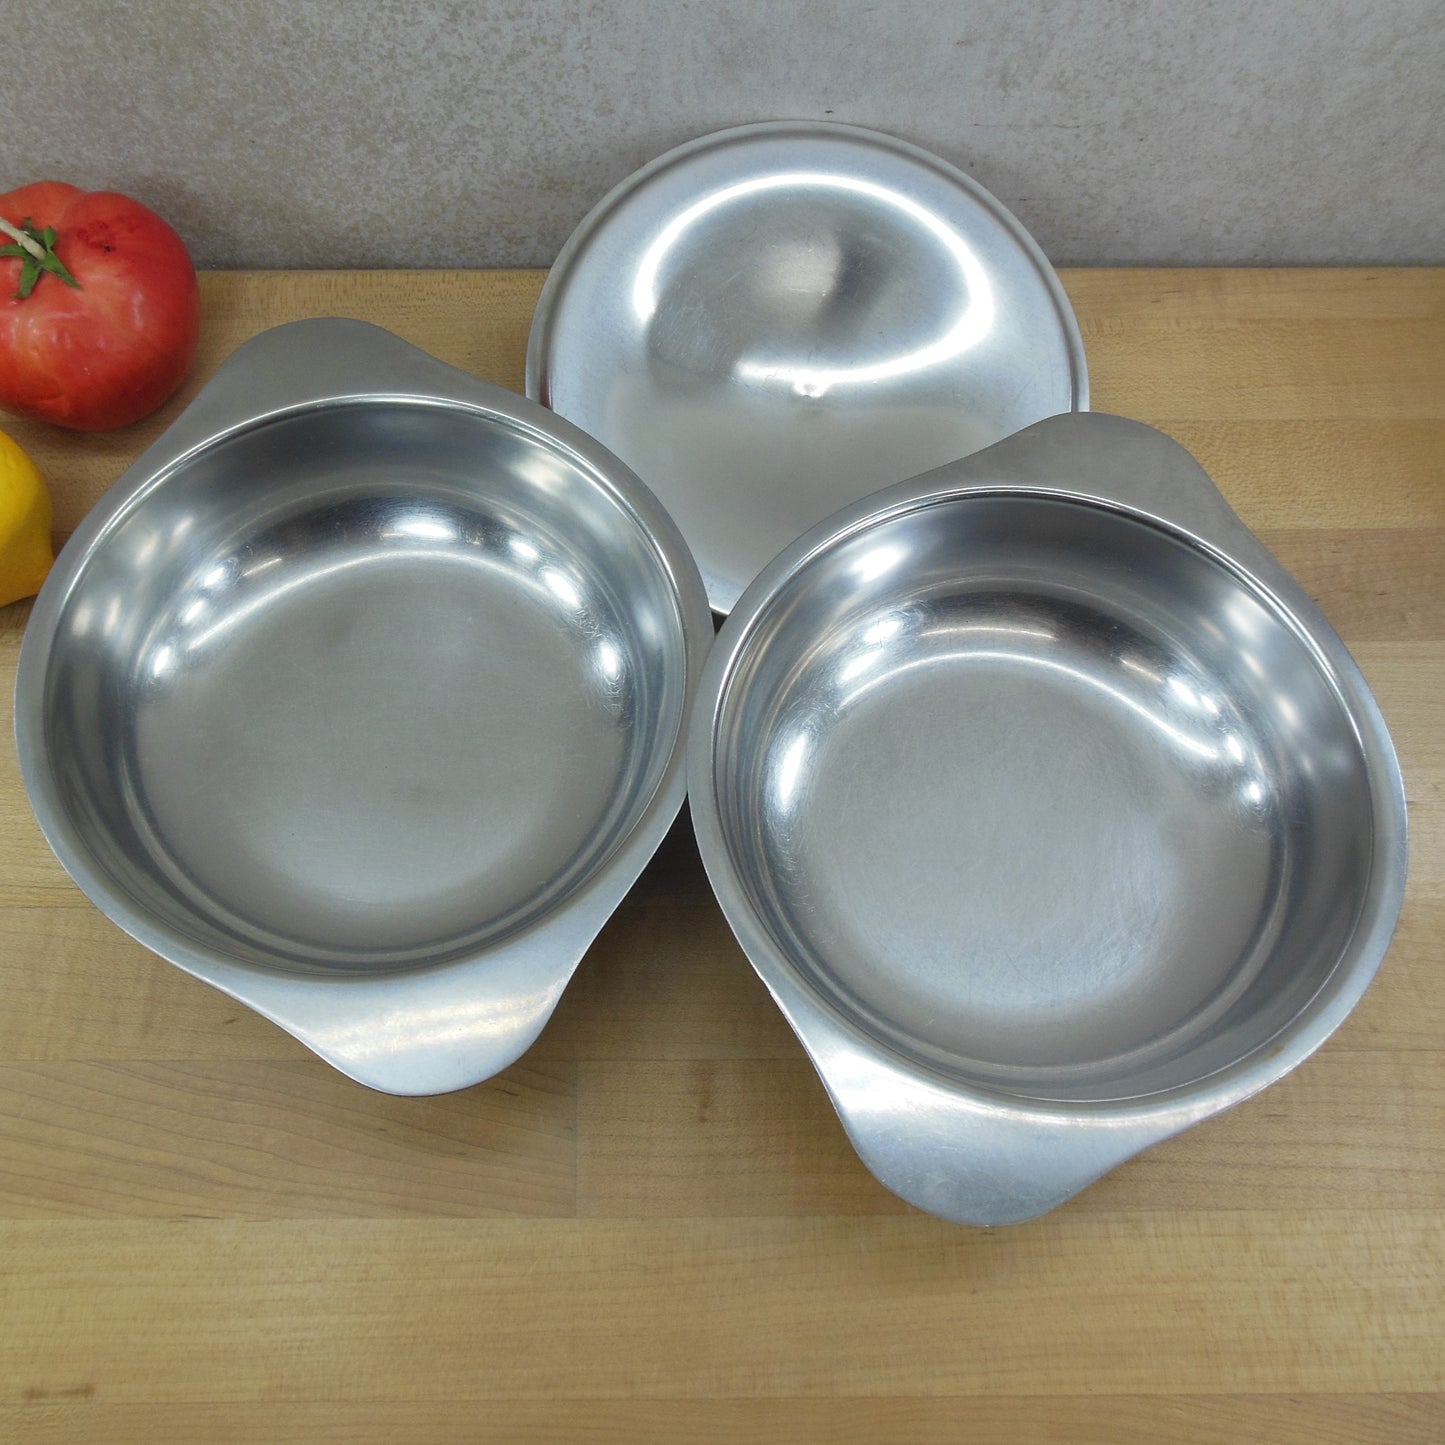 Broms Sweden 18-8 Stainless Covered and Open Serving Bowls vintage